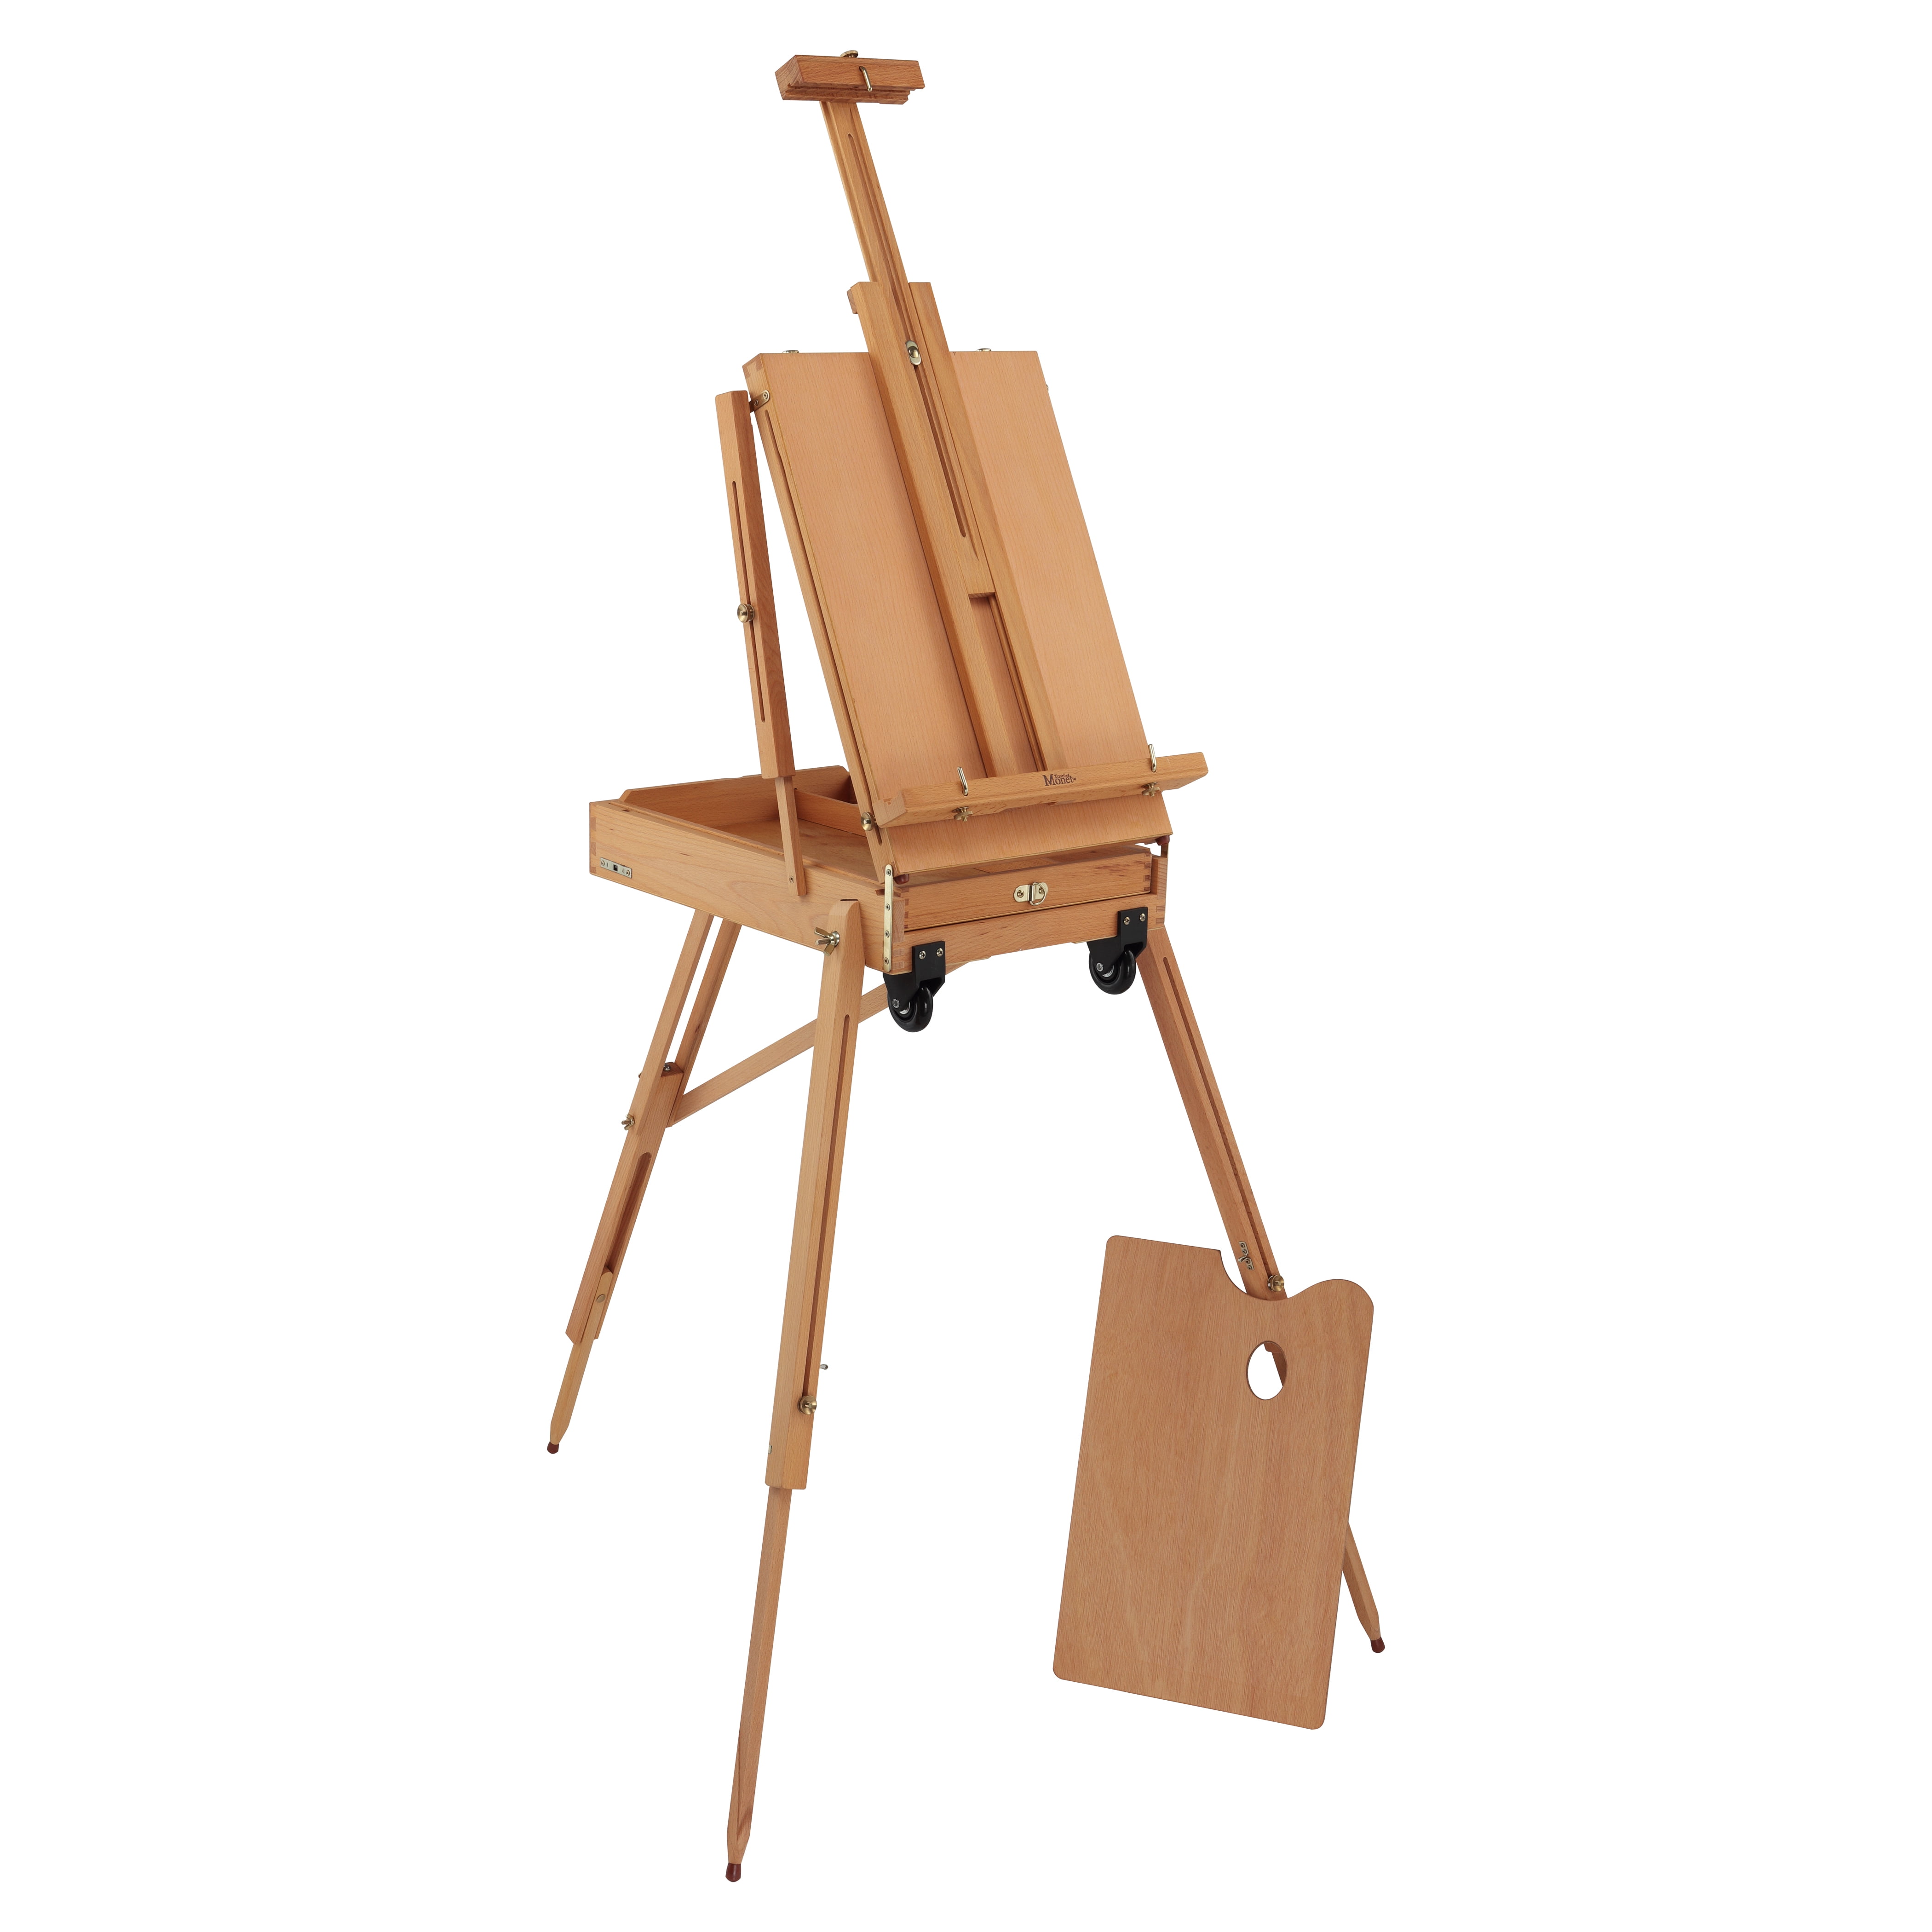 MEEDEN Extra-Large Tabletop Easel, Solid Beech Wood Table Top Easels for  Painting Canvas, Sketchbox Easel, Table Art Easel for Adults & Artist, Art